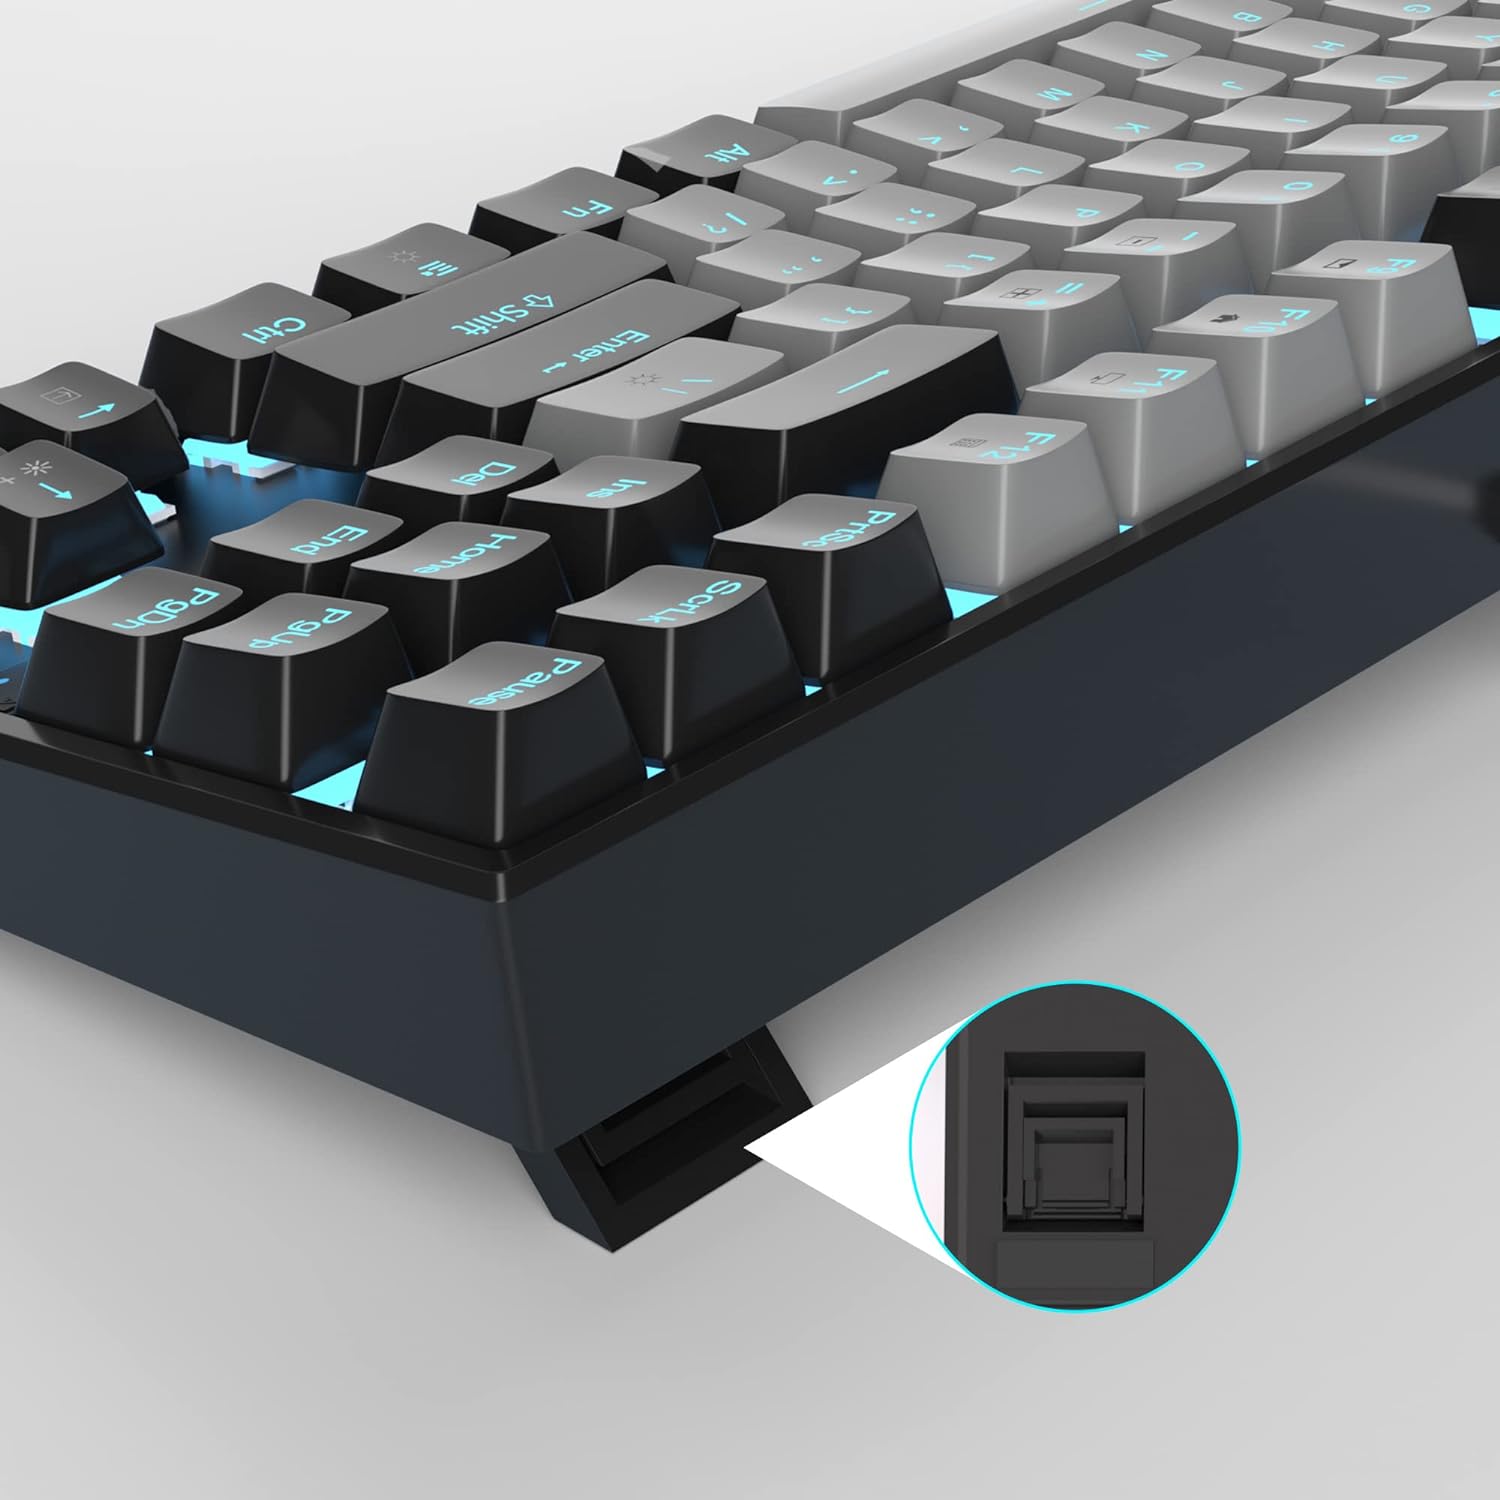 Mechanical Gaming Keyboard LED Backlit Compact TKL Wired